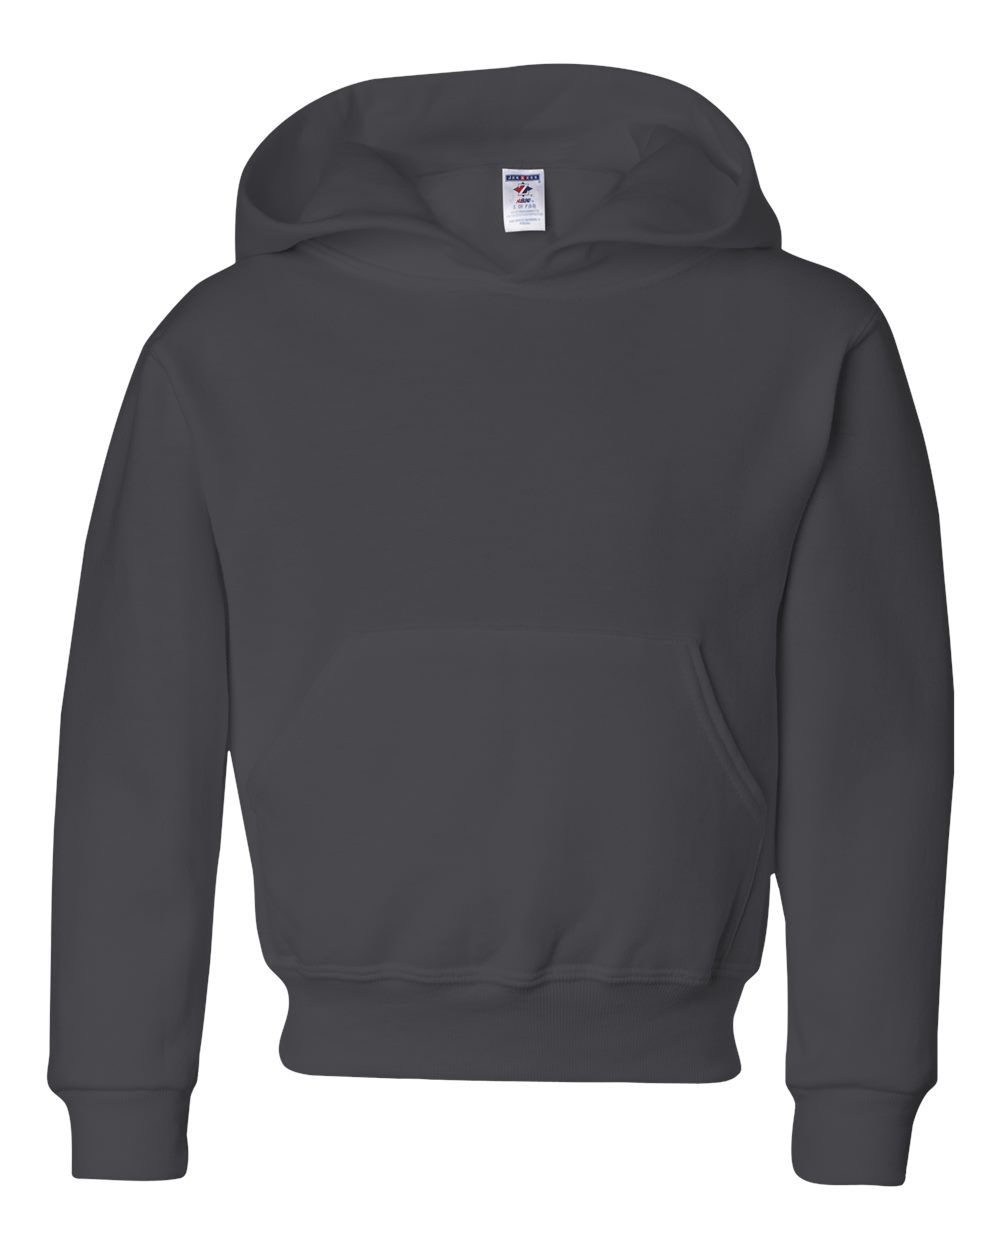 Jerzees Youth Hoodie (996YR) in Charcoal Grey